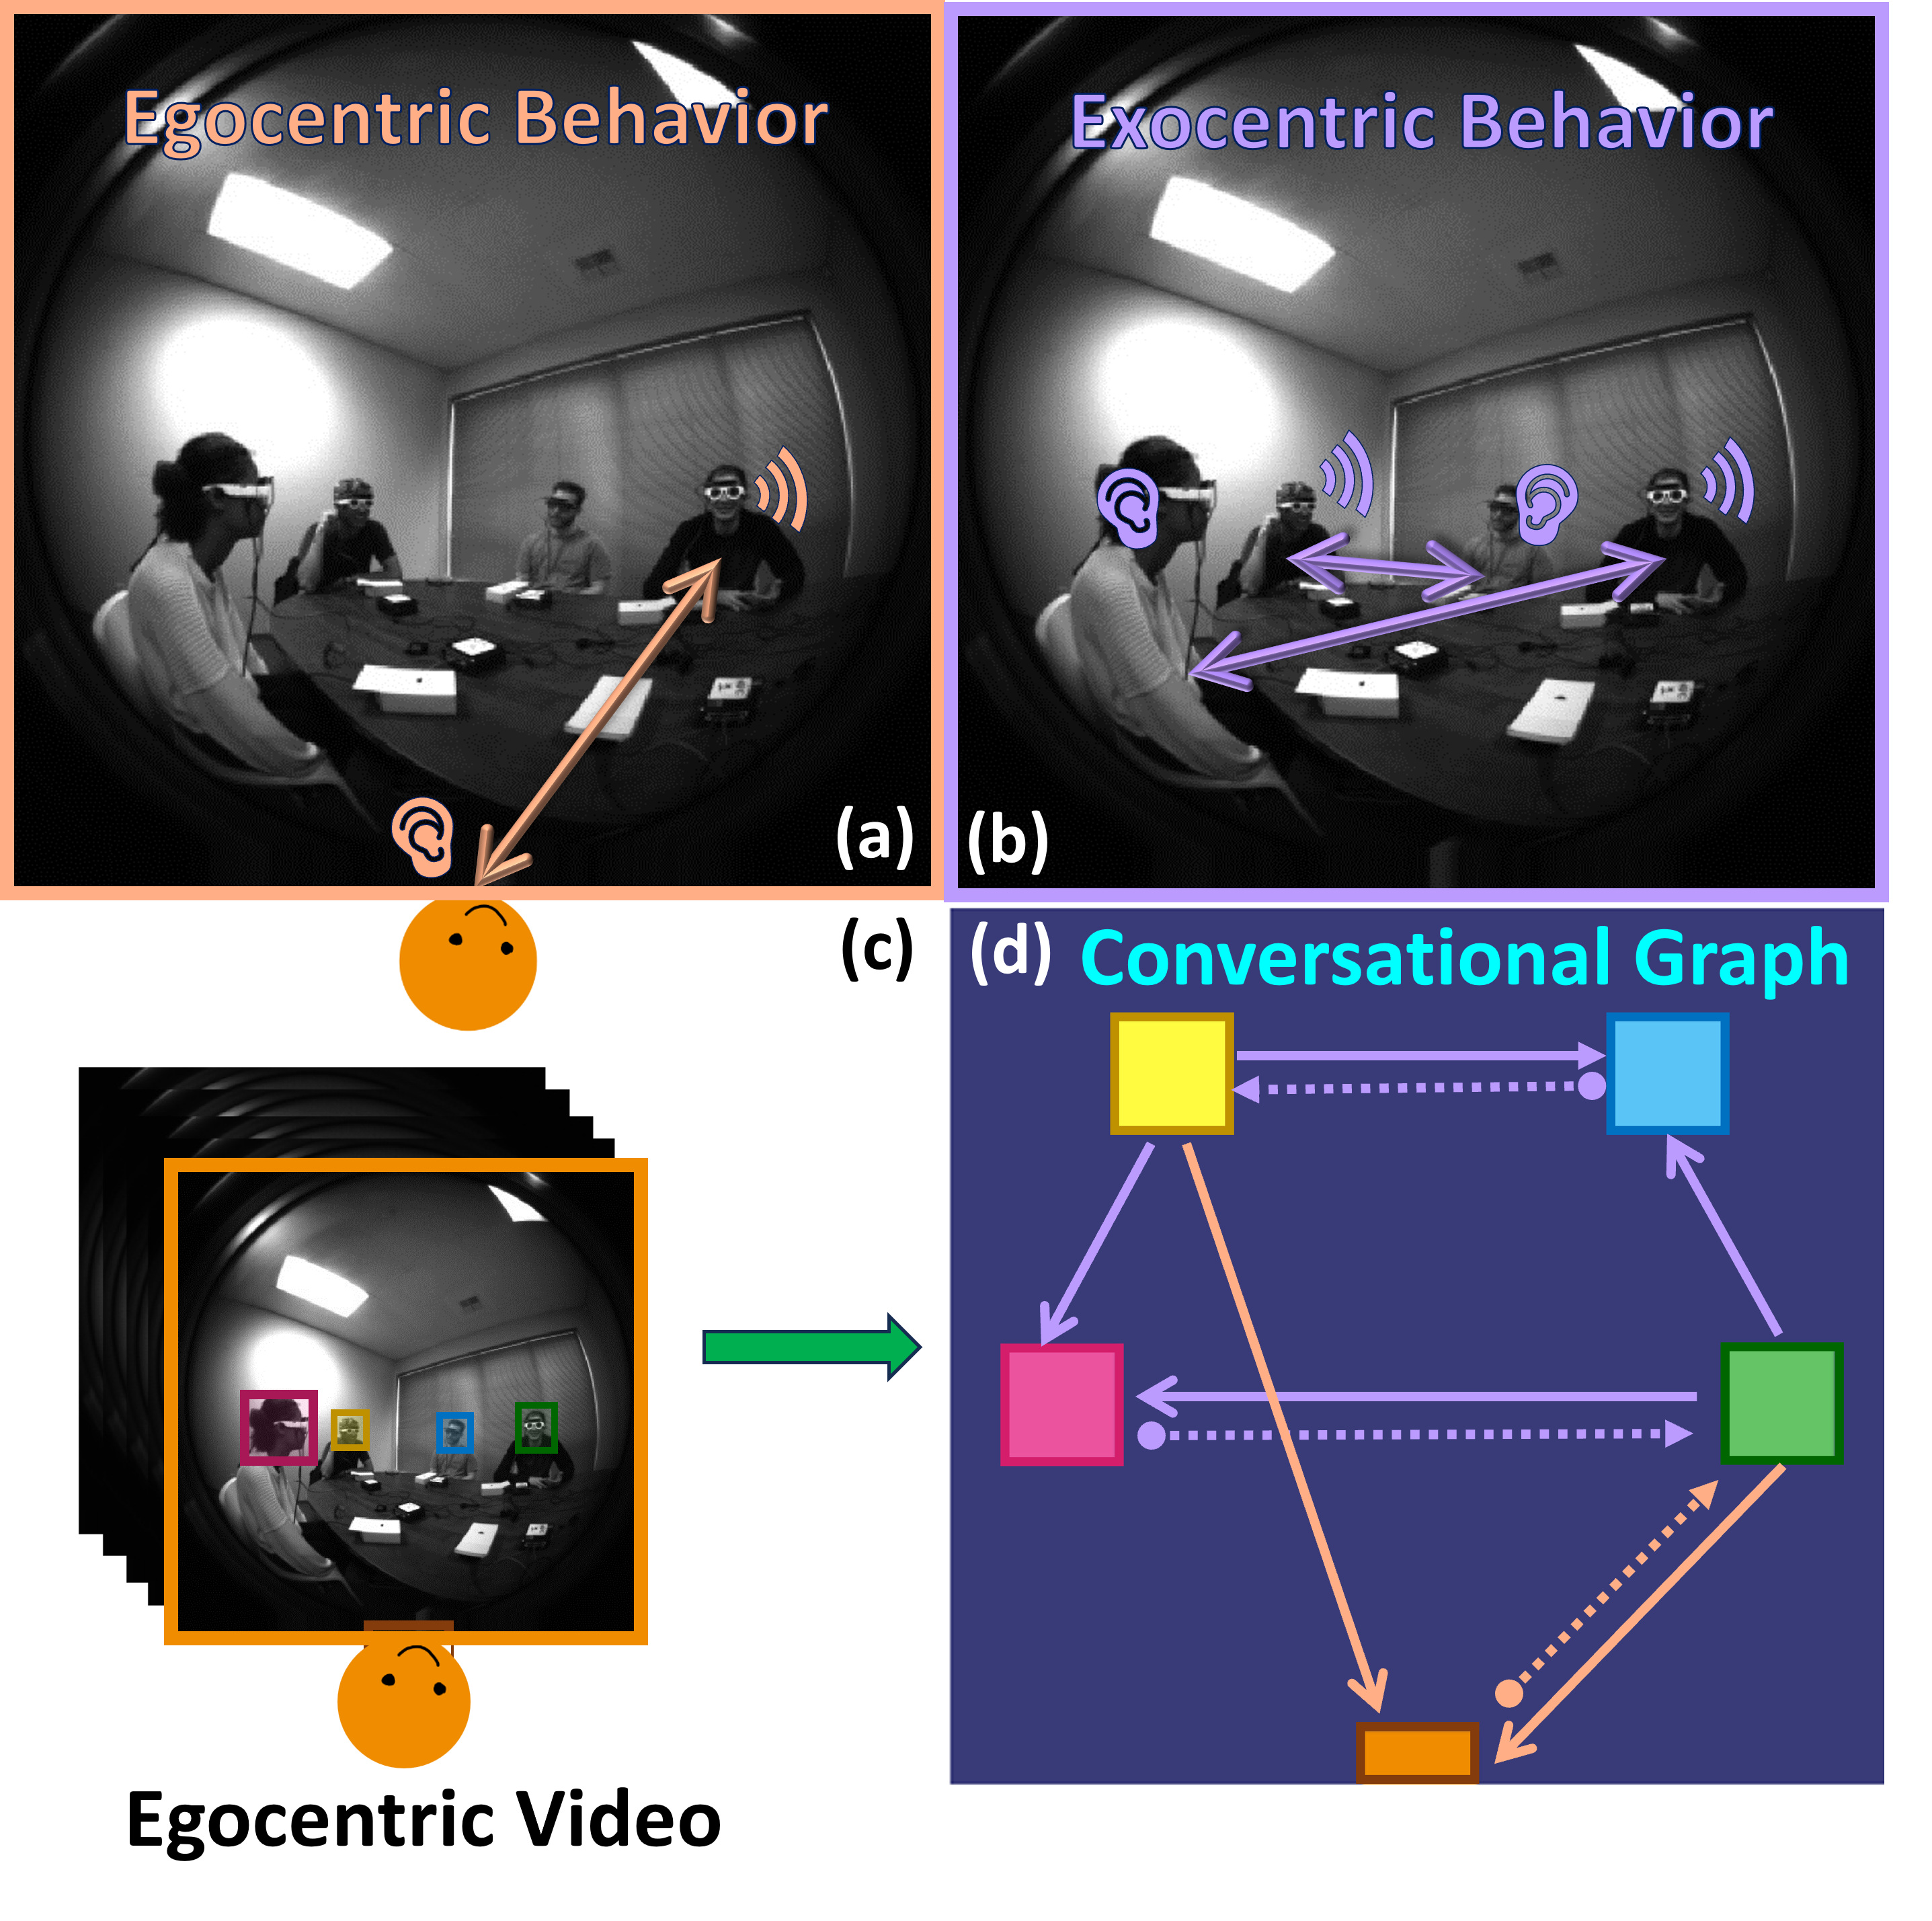 The Audio-Visual Conversational Graph: From an Egocentric-Exocentric Perspective